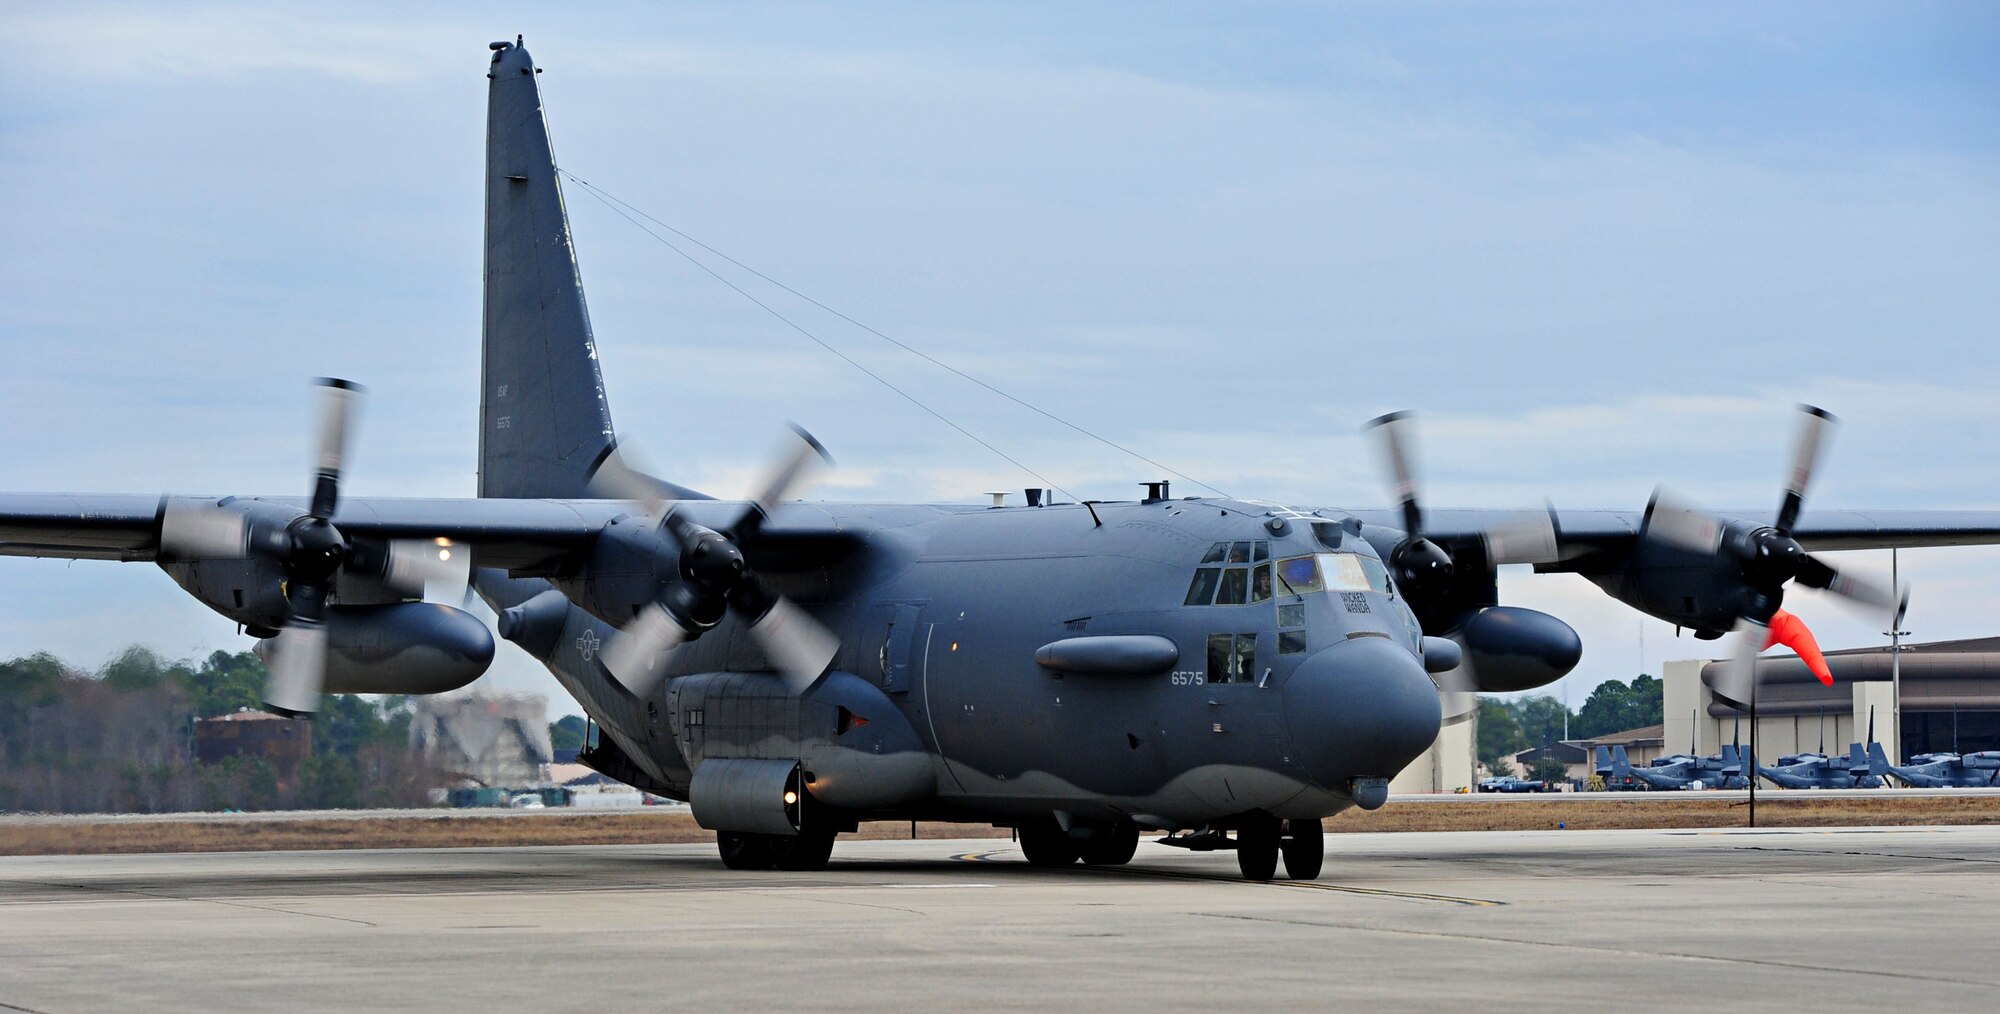 “Wicked Wanda” an AC-130H Spectre gunship taxis for the last time after serving 43 years with the 16th Special Operations Squadron and 4th SOS on Hurlburt Field, Fla., Dec. 19, 2014. “Wicked Wanda” flew her last flight here Dec. 19, and is scheduled to officially retire to the Hurlburt Field Air Park in 2015. (U.S. Air Force photo/Senior Airman Desiree W. Moye)